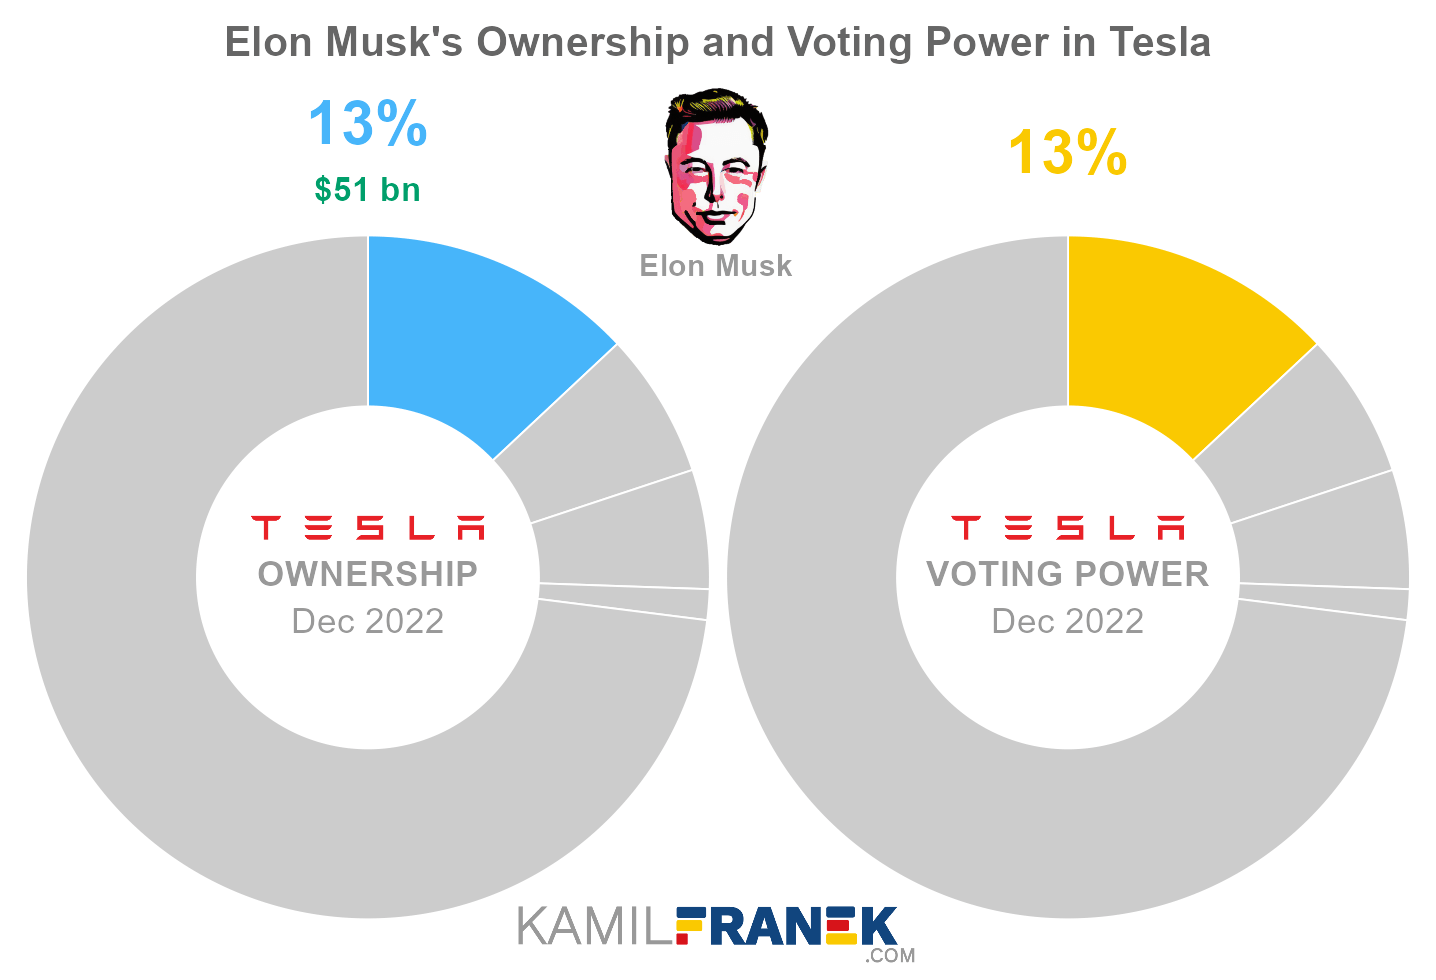 Elon Musk's share ownership and voting power in Tesla (chart)